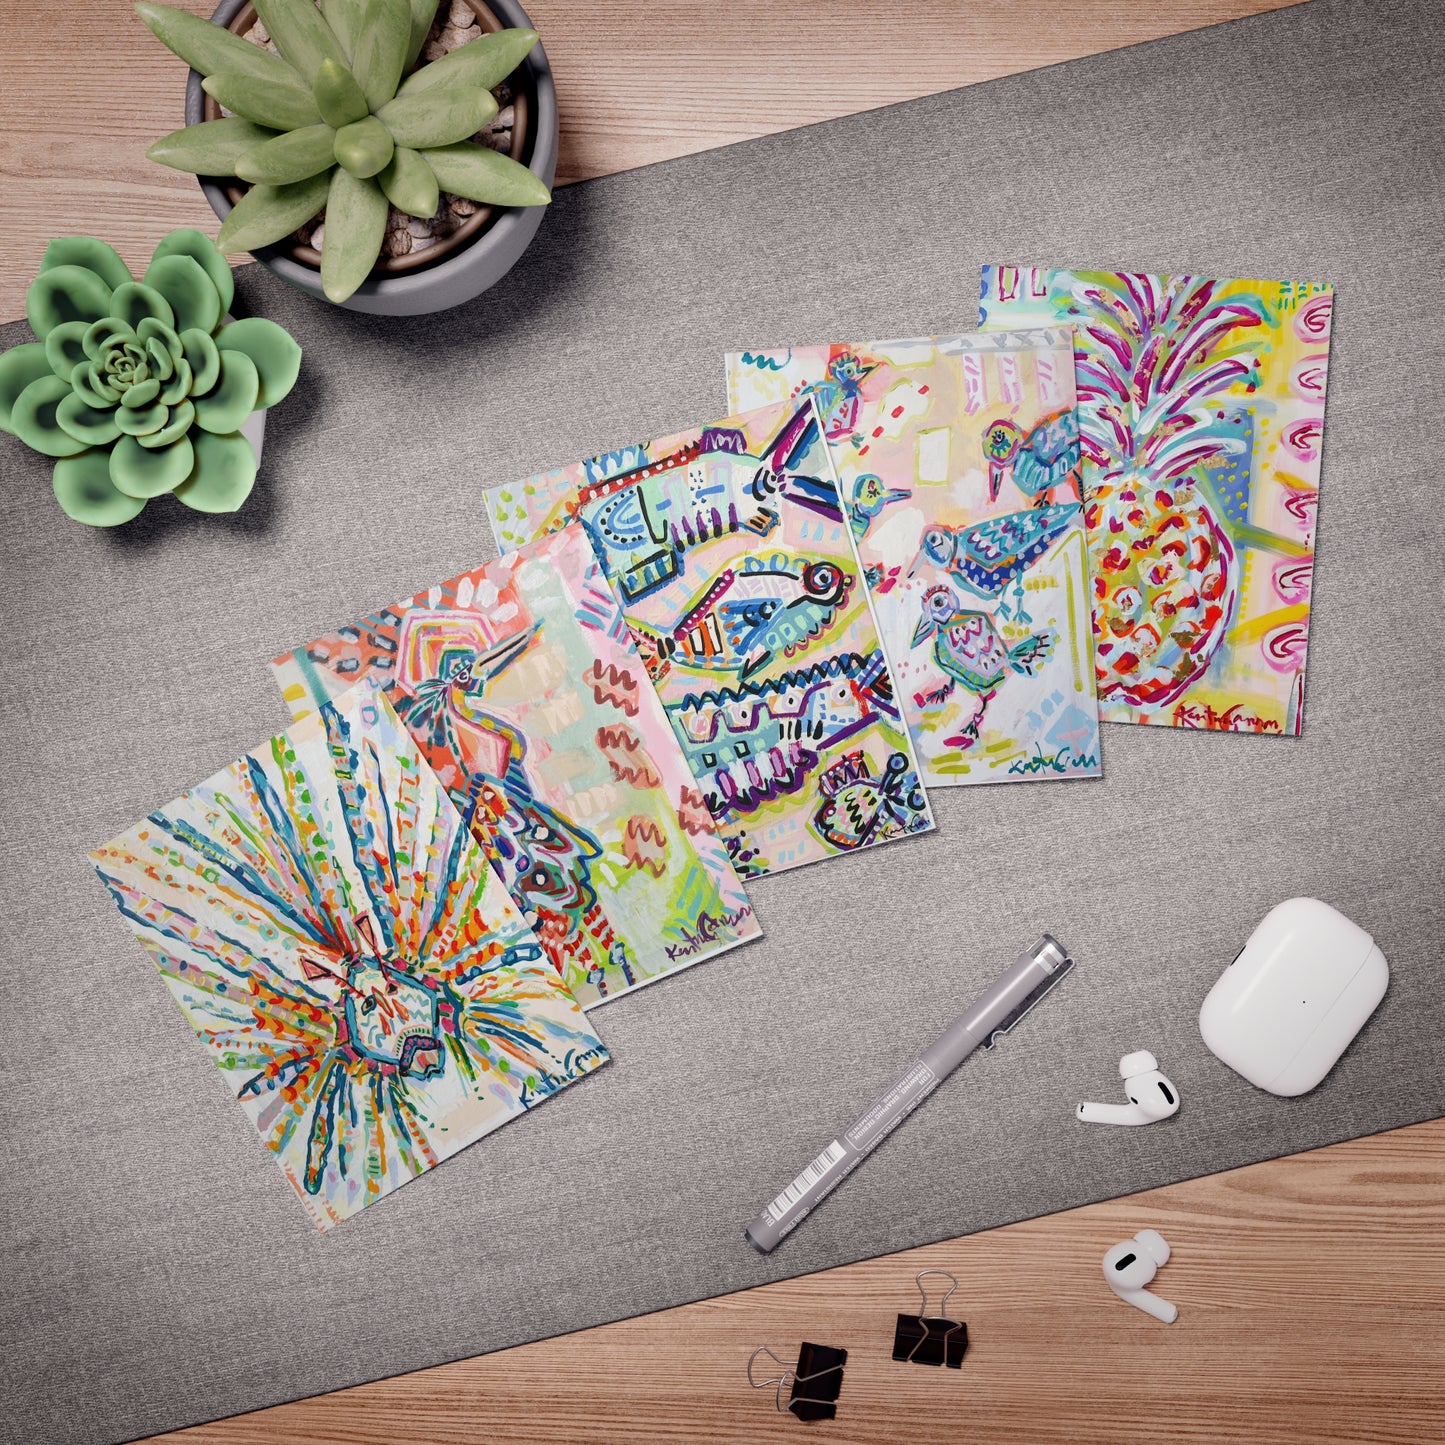 Tropical Multi-Design Greeting Cards (5-Pack)